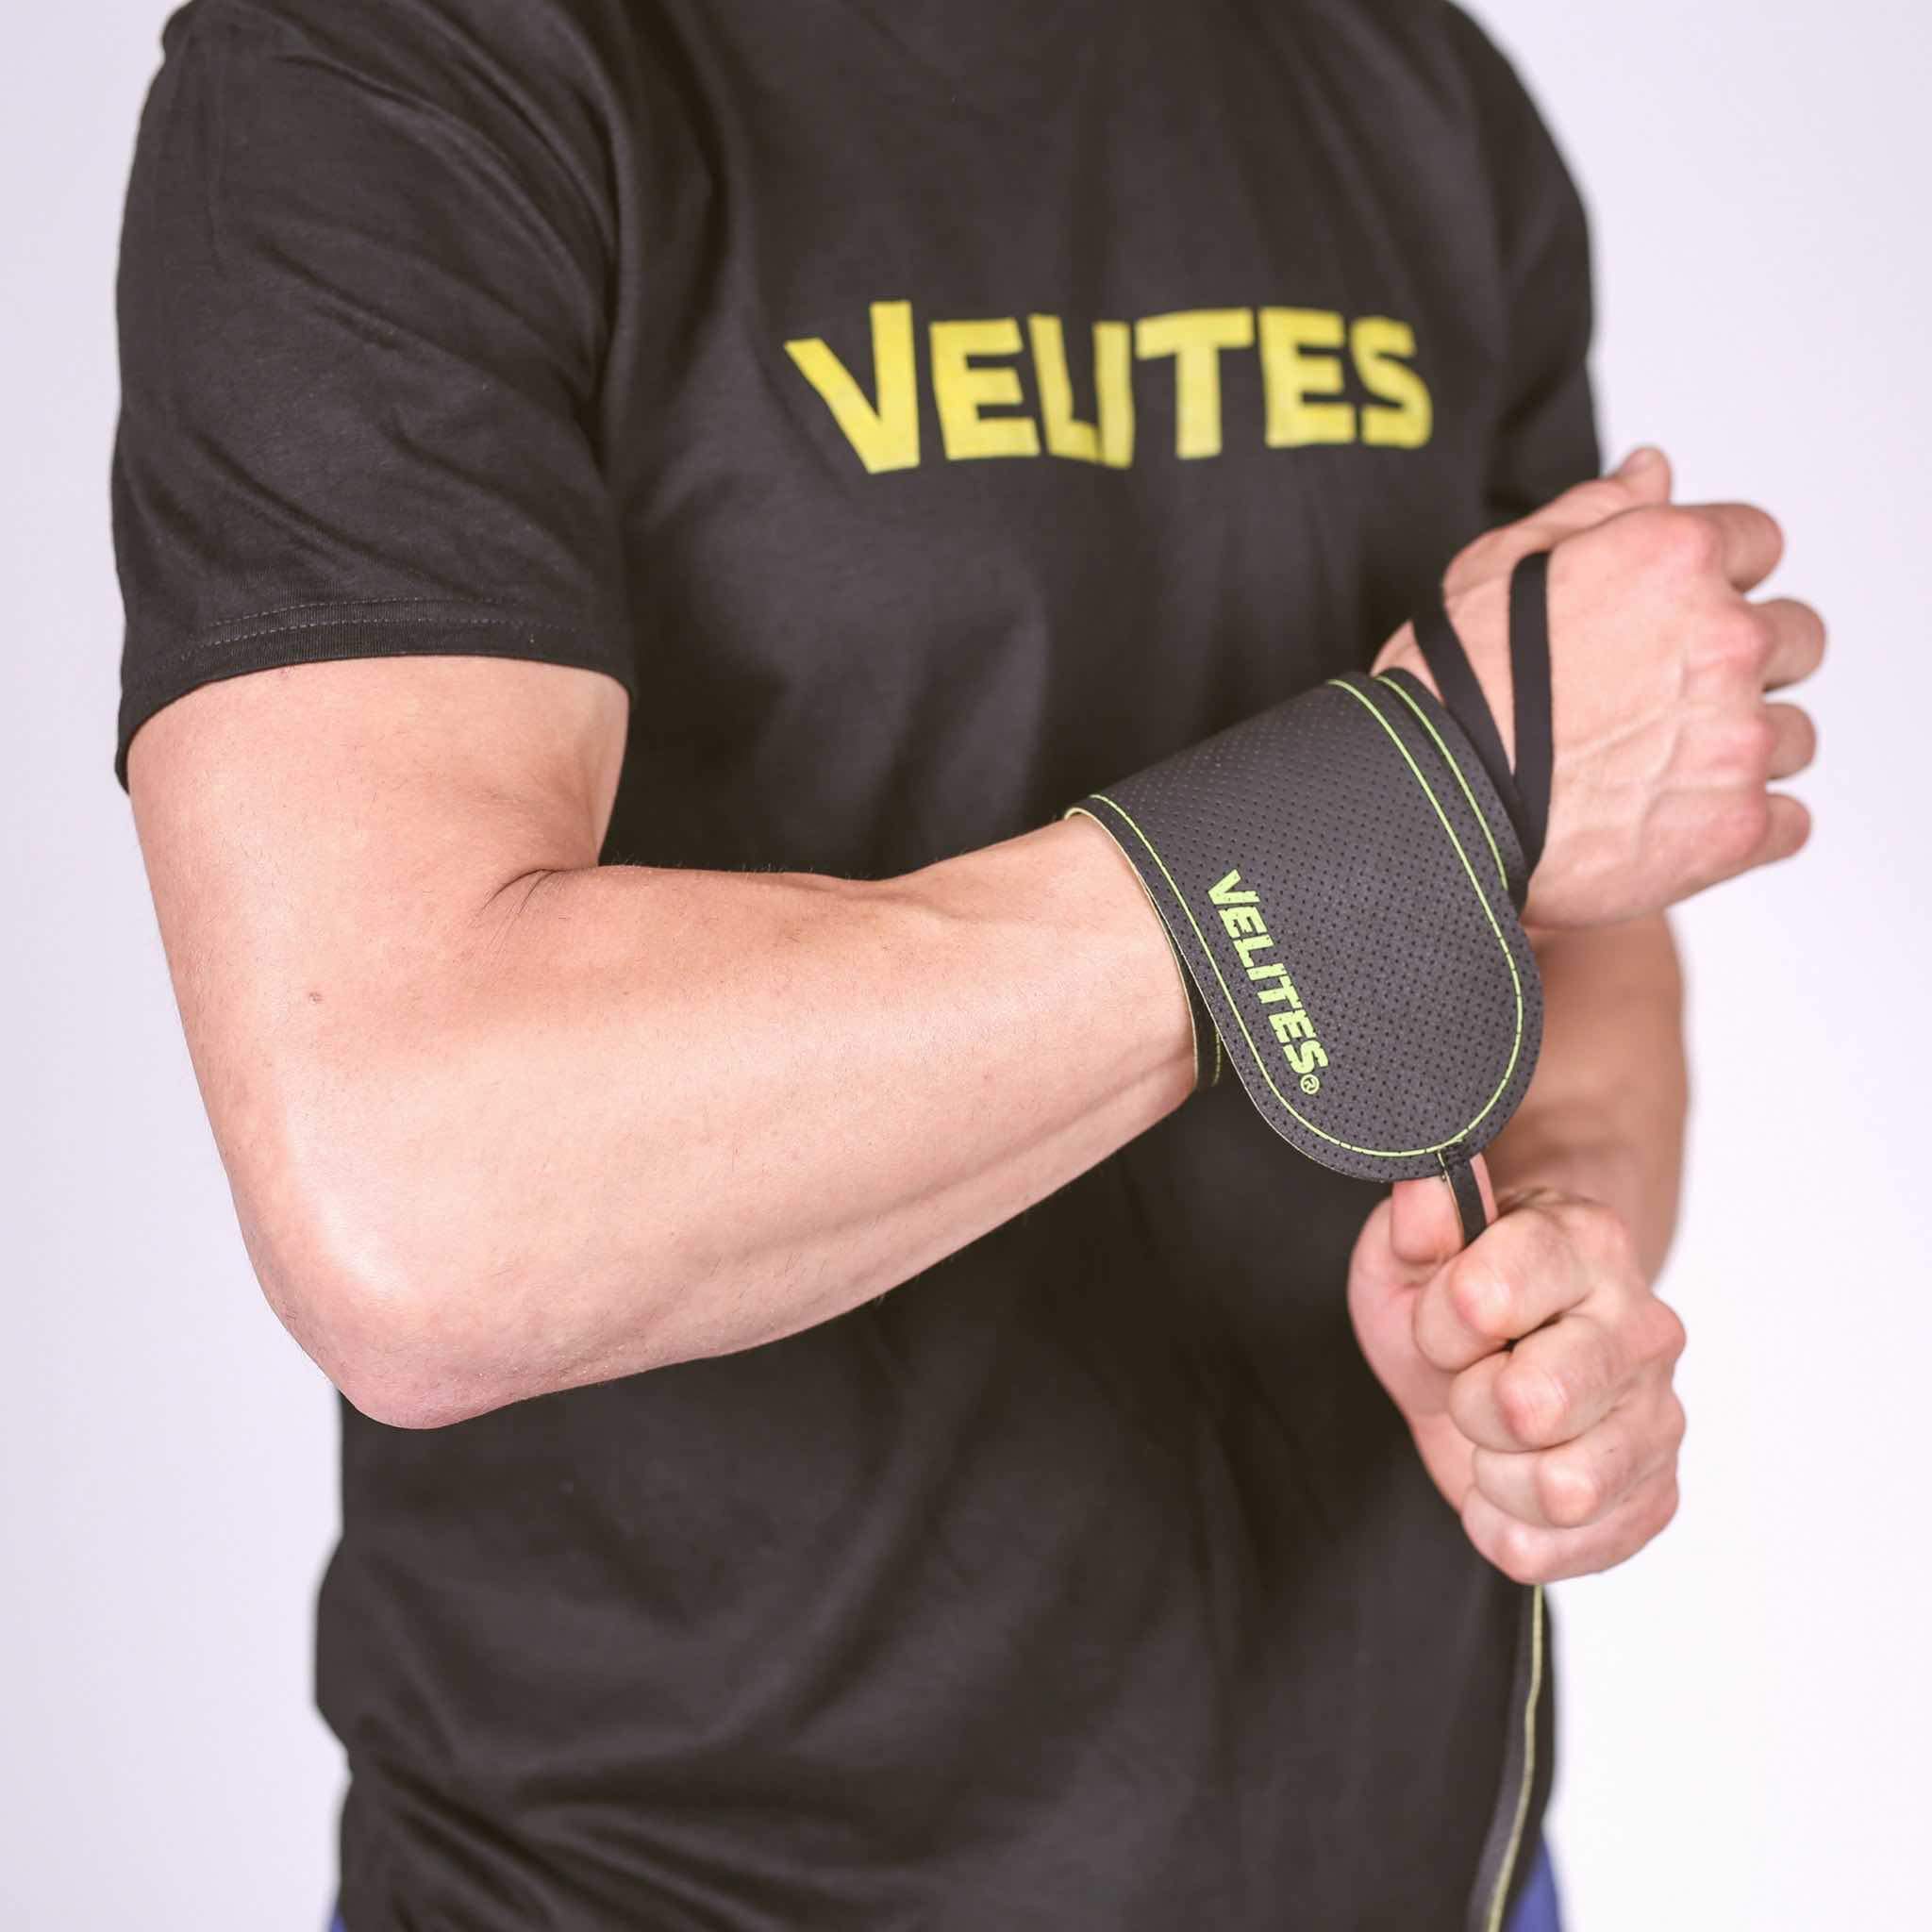 Wrist Wraps Core Green I good wrist wraps for weightlifting